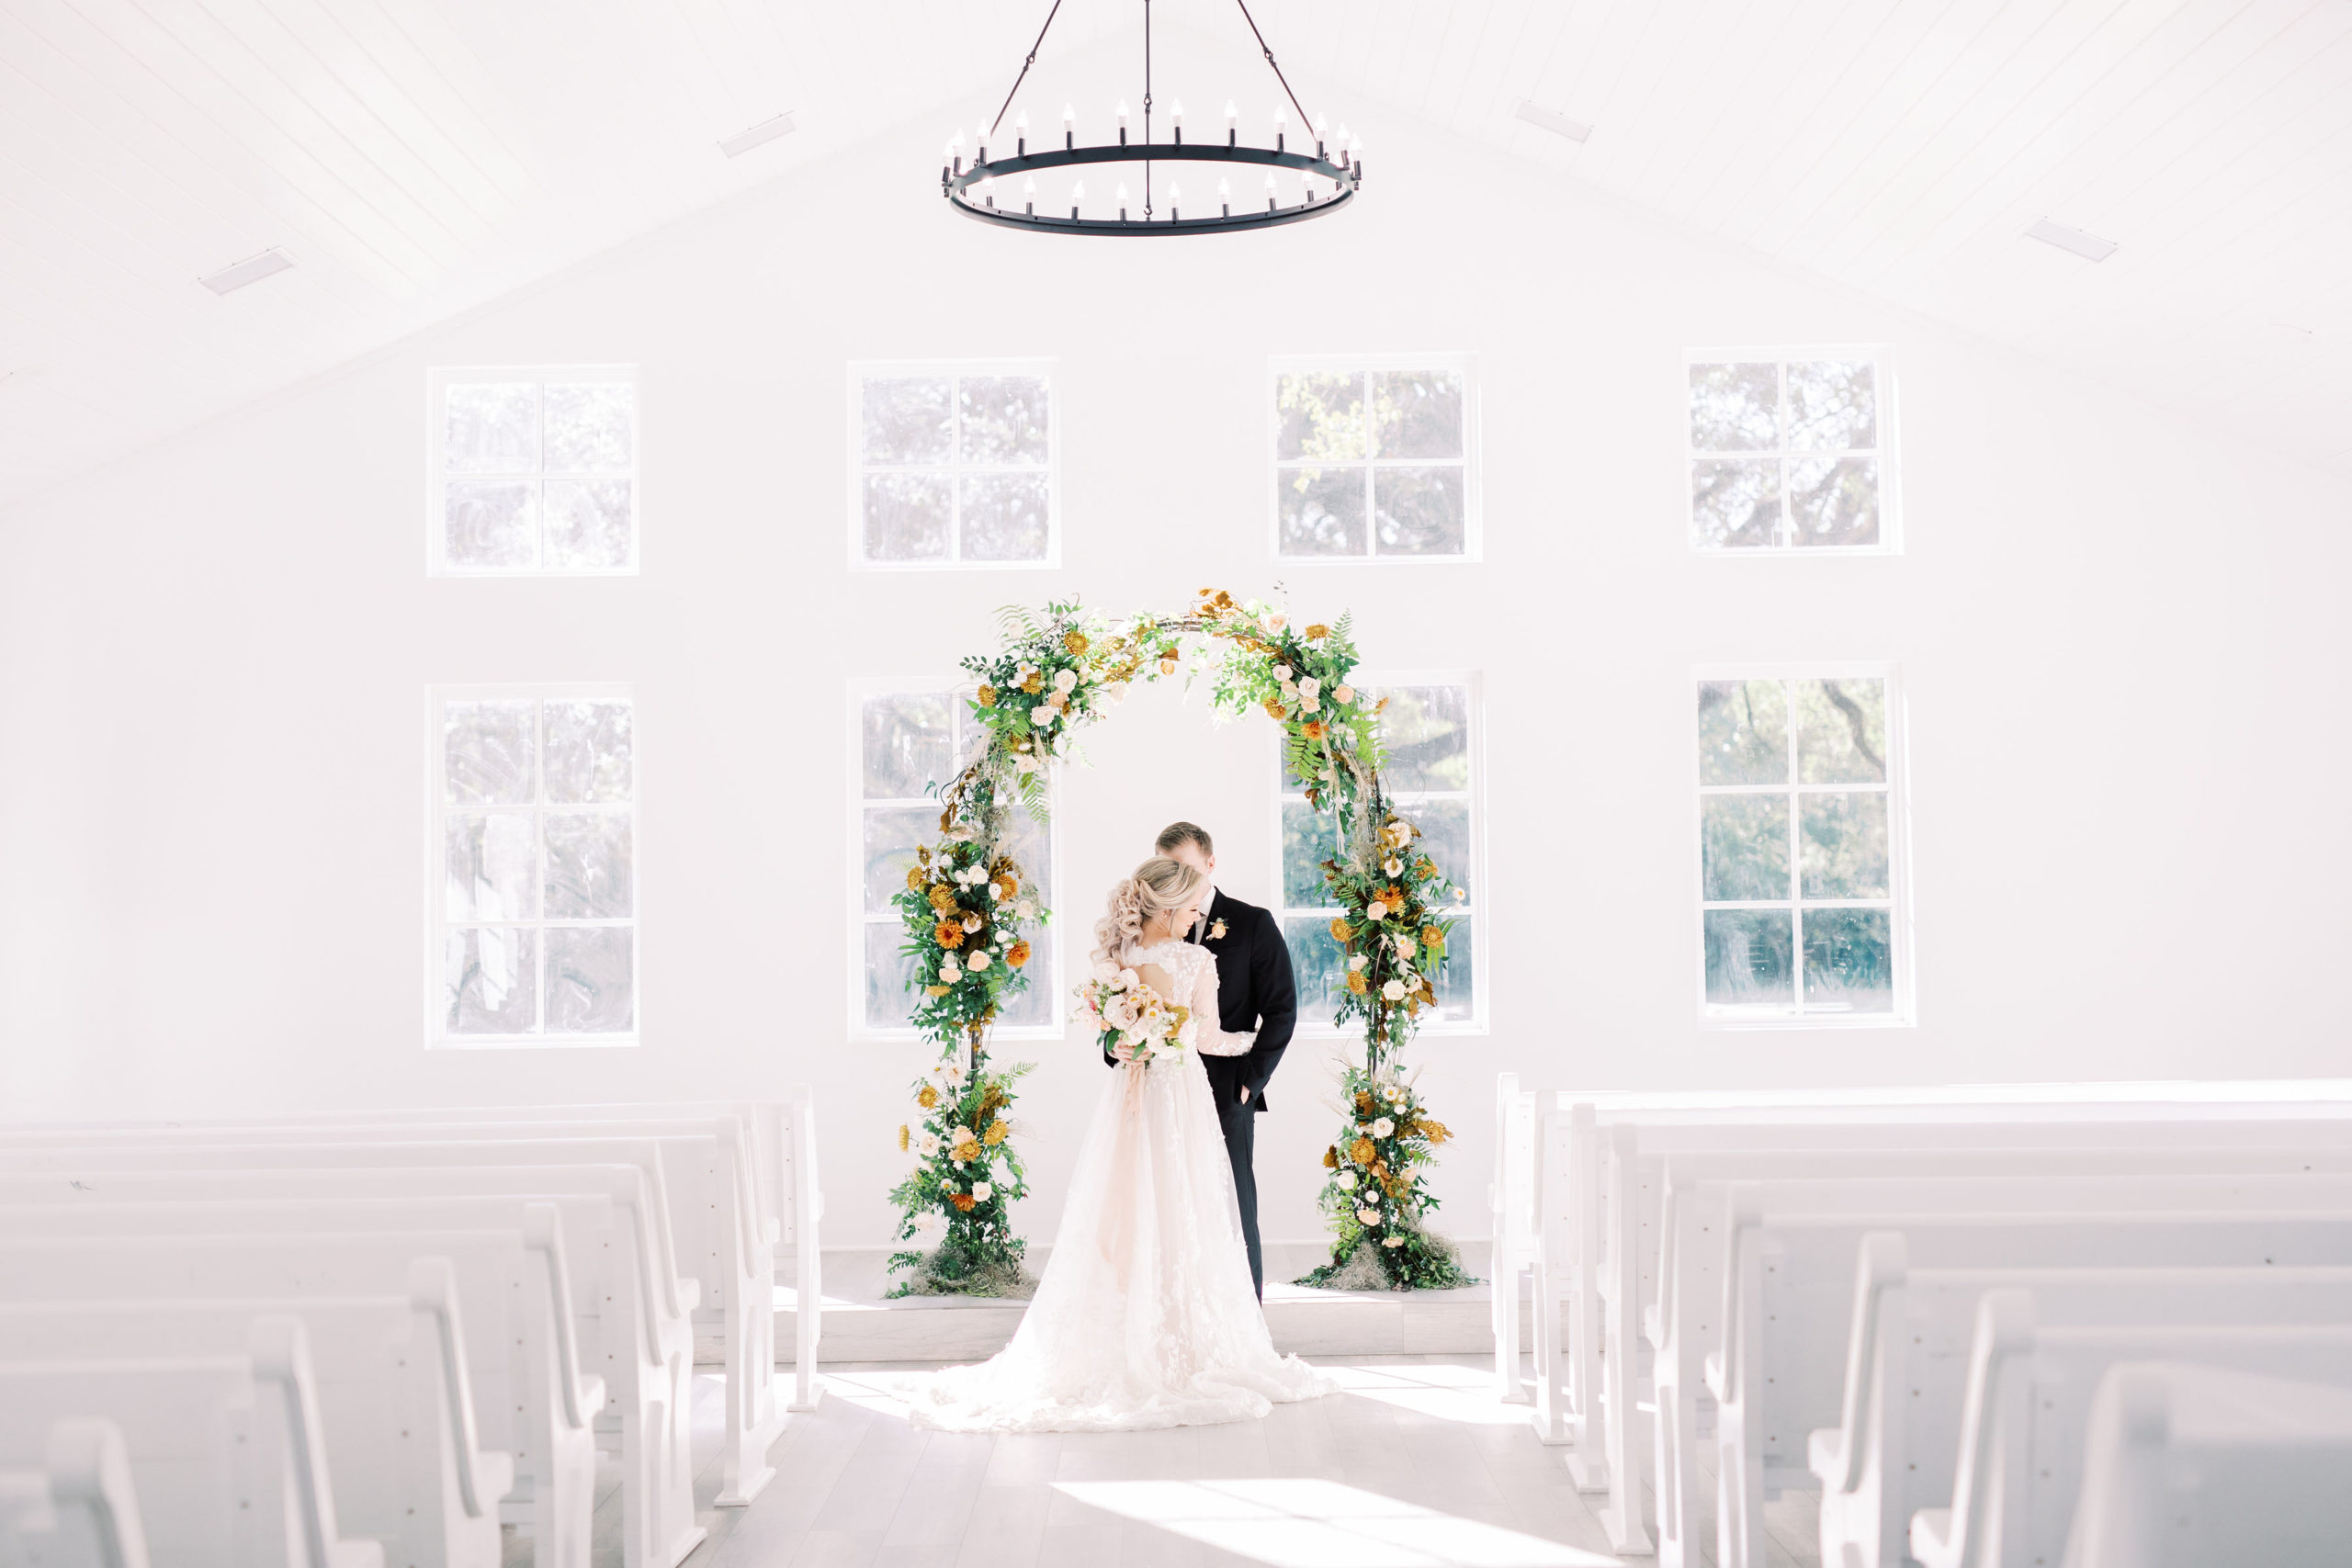 Bride and groom at Addison Woods Chapel under floral arch